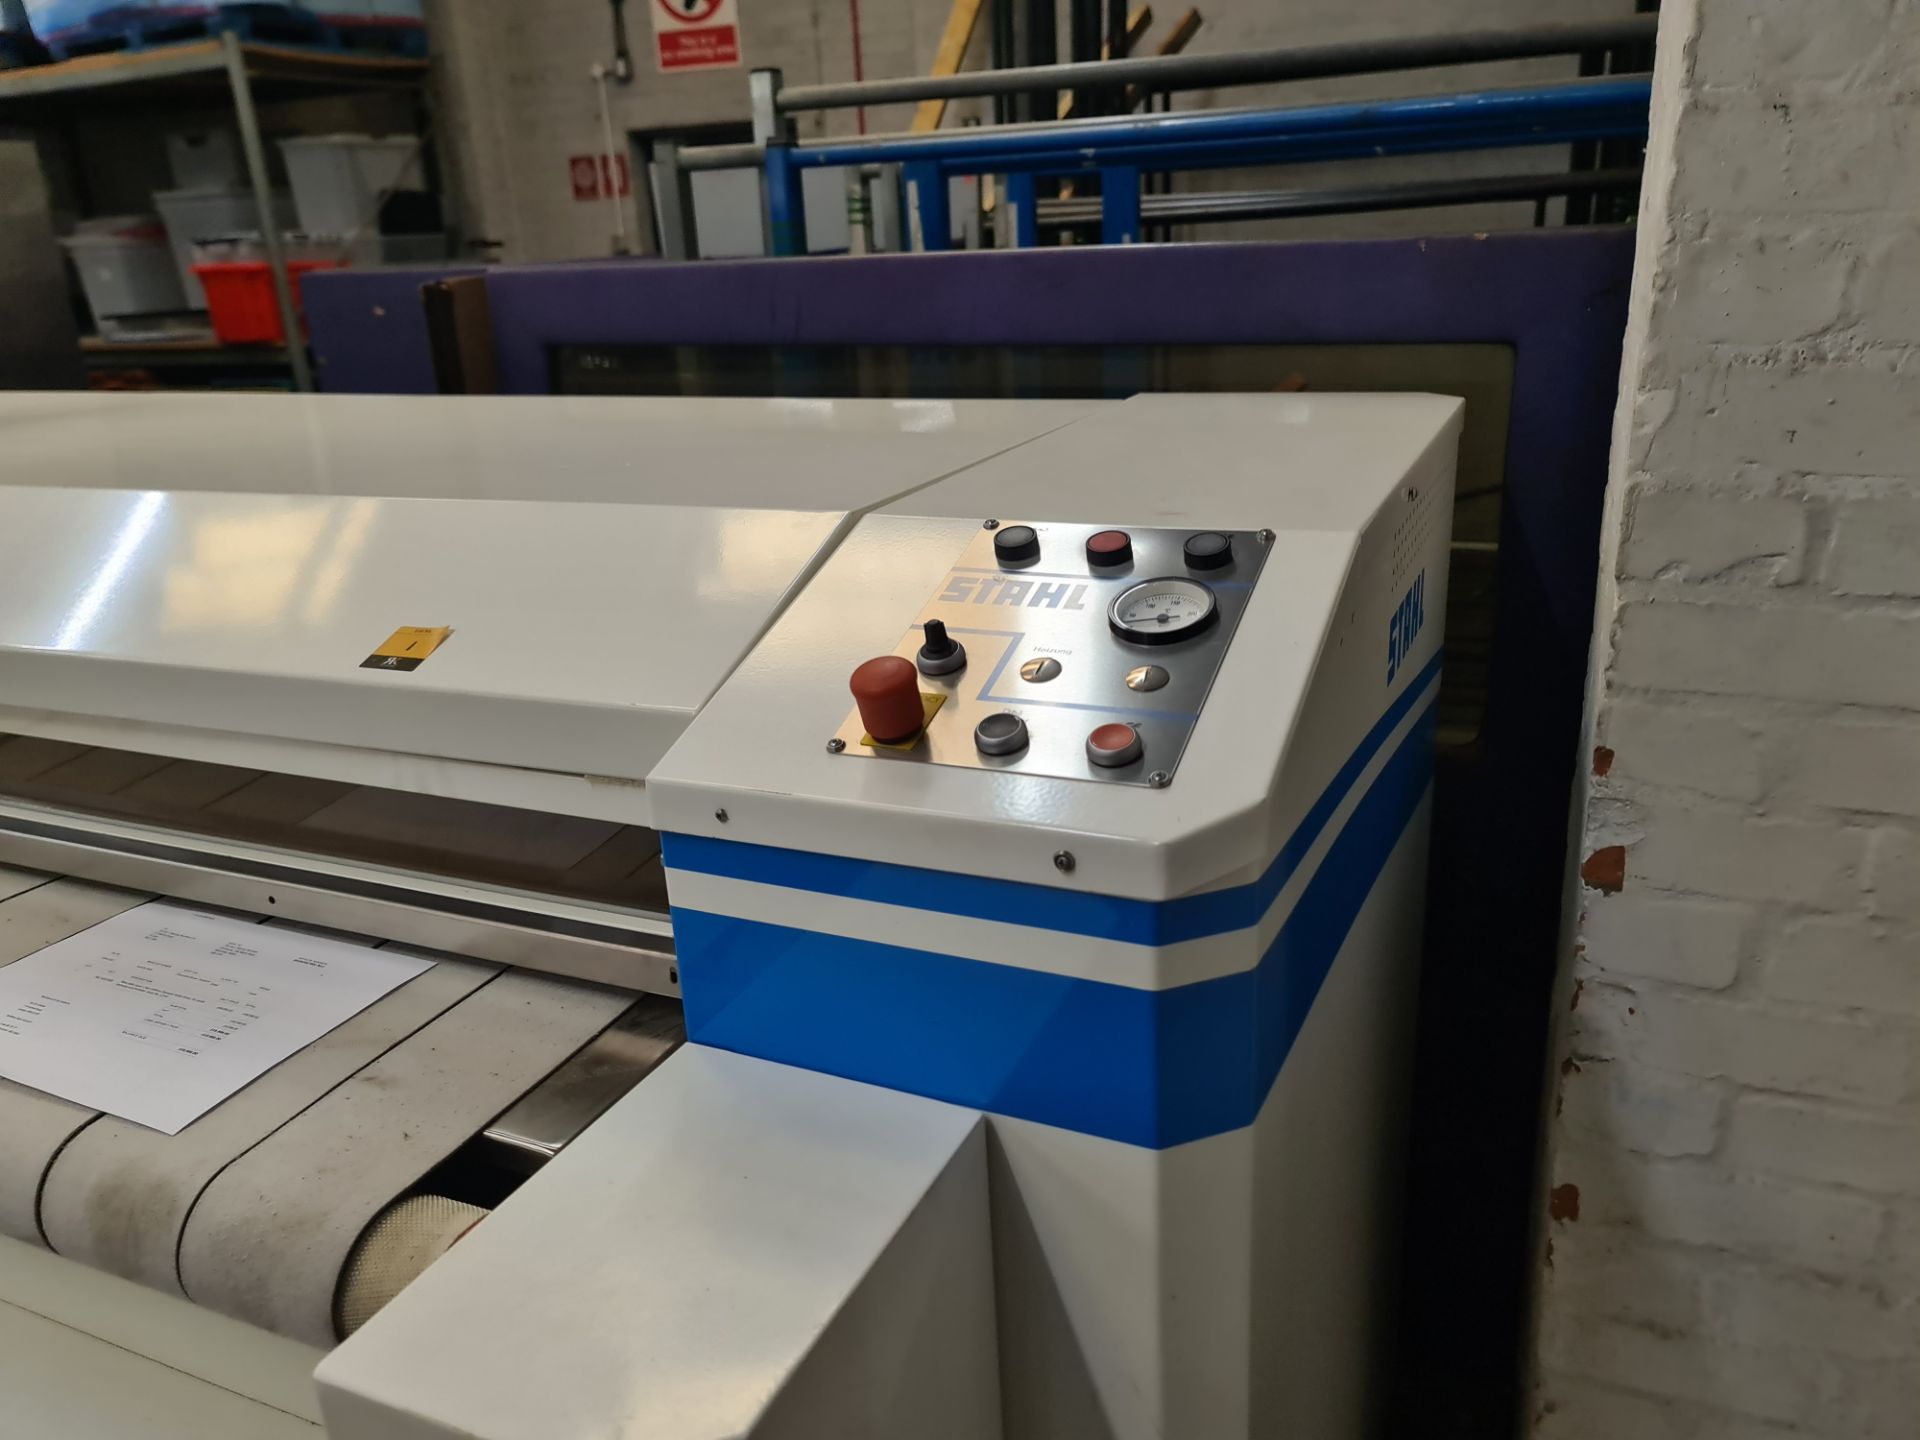 2017 Stahl flatwork ironer Super Chest ironing system, type MC 600/3000 D - Image 18 of 20